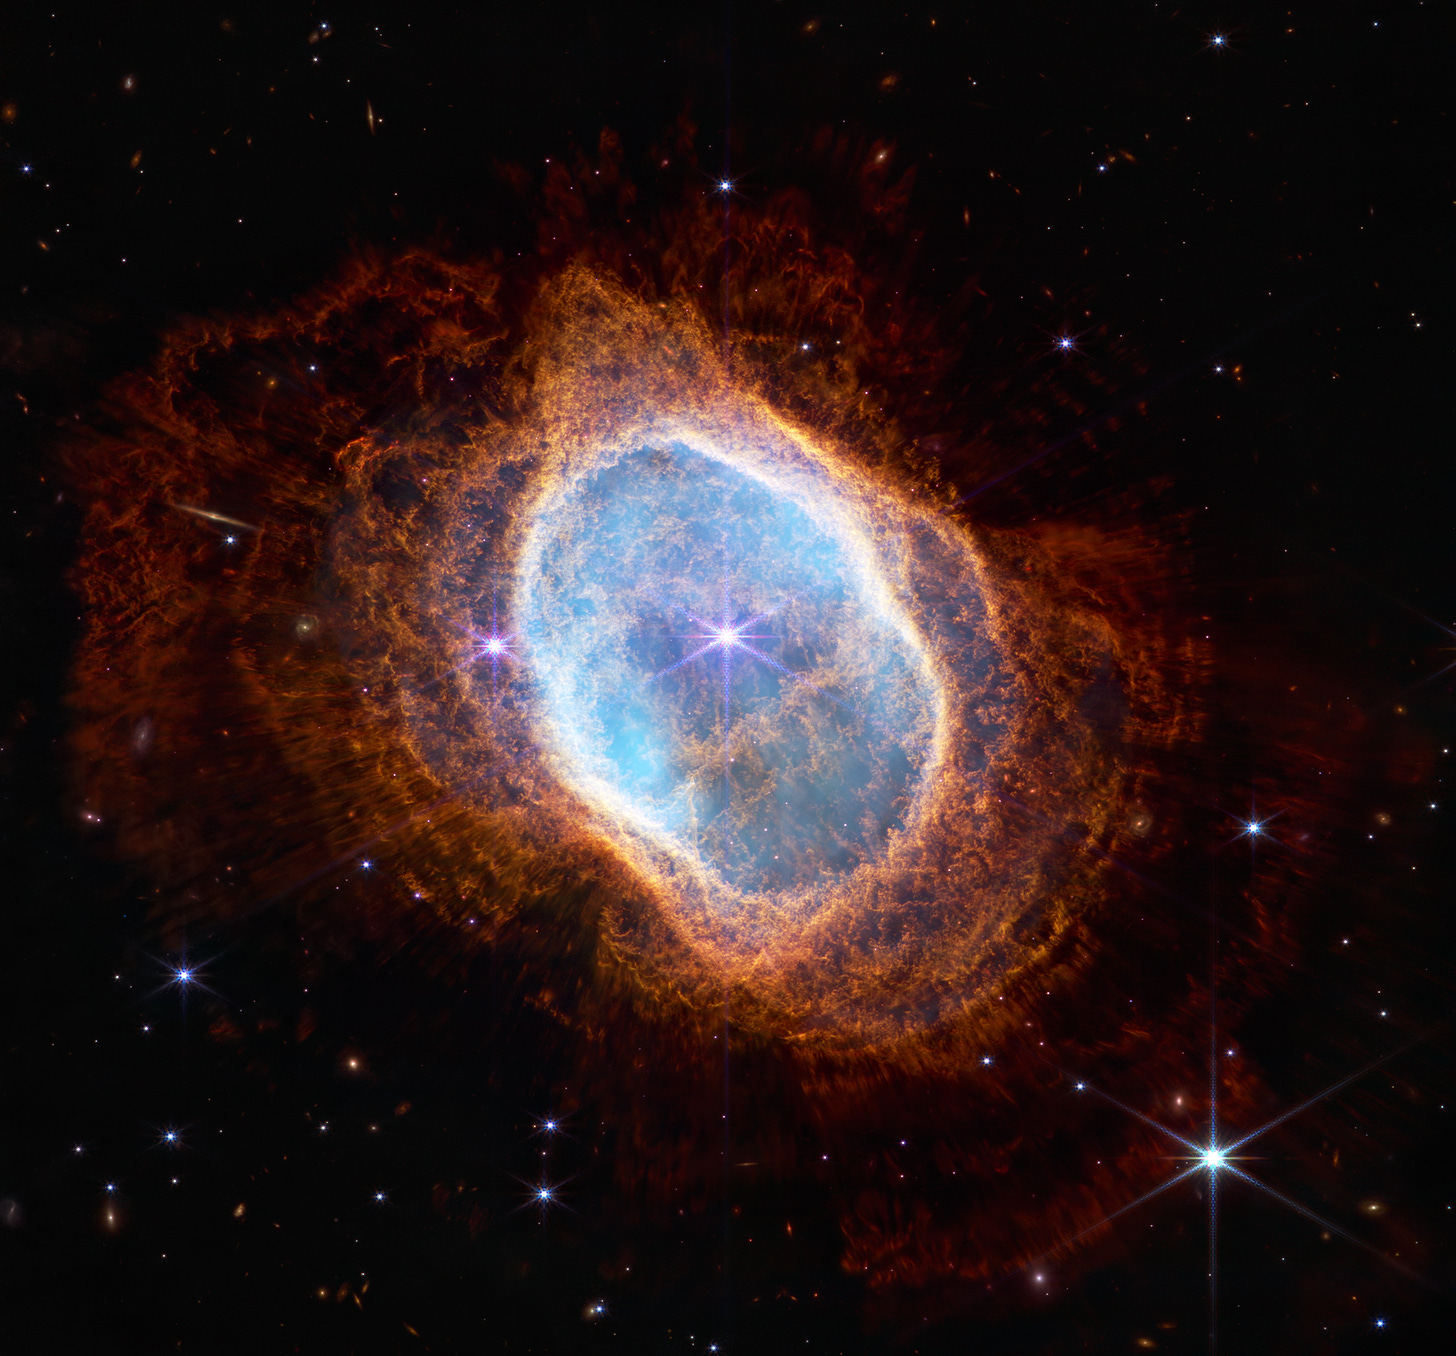  The Southern Ring Nebula, which is sometimes called “eight-burst.’ About 2,500 light-years away, it shows an expanding cloud of gas surrounding a dying star.